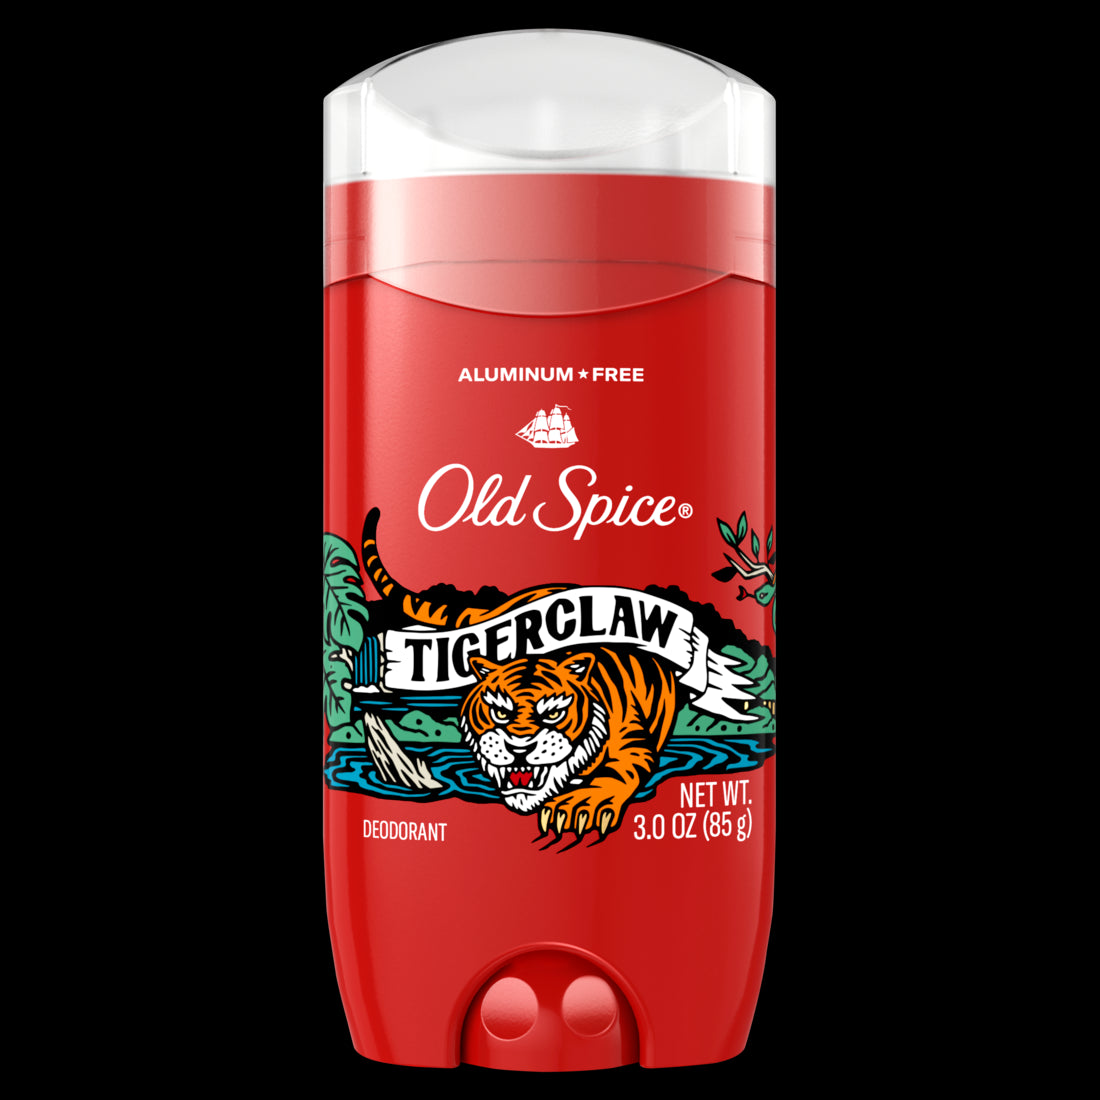 Old Spice Aluminum Free Deodorant for Men TigerClaw 48 Hour Protection - 3.0oz/12pk